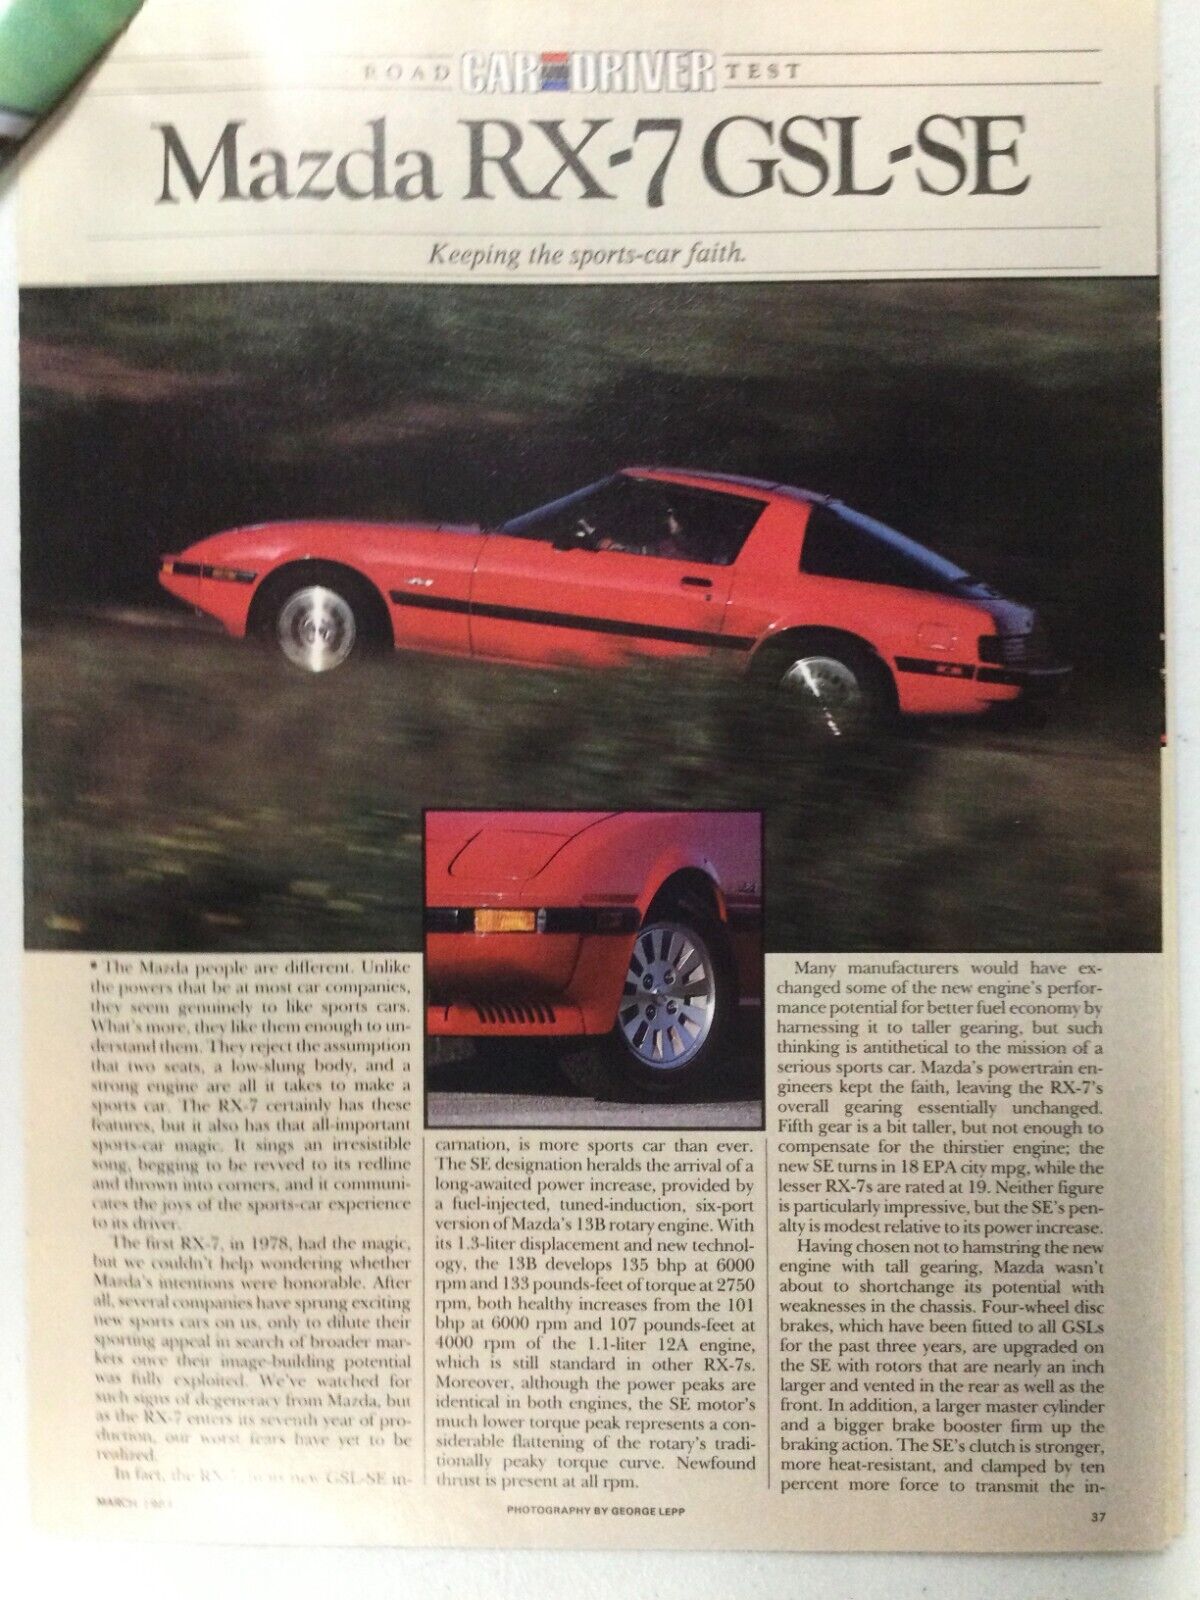 MazdaArt23 Article Road Test 1984 Mazda RX-7 GSL-Se March 1984 6 page